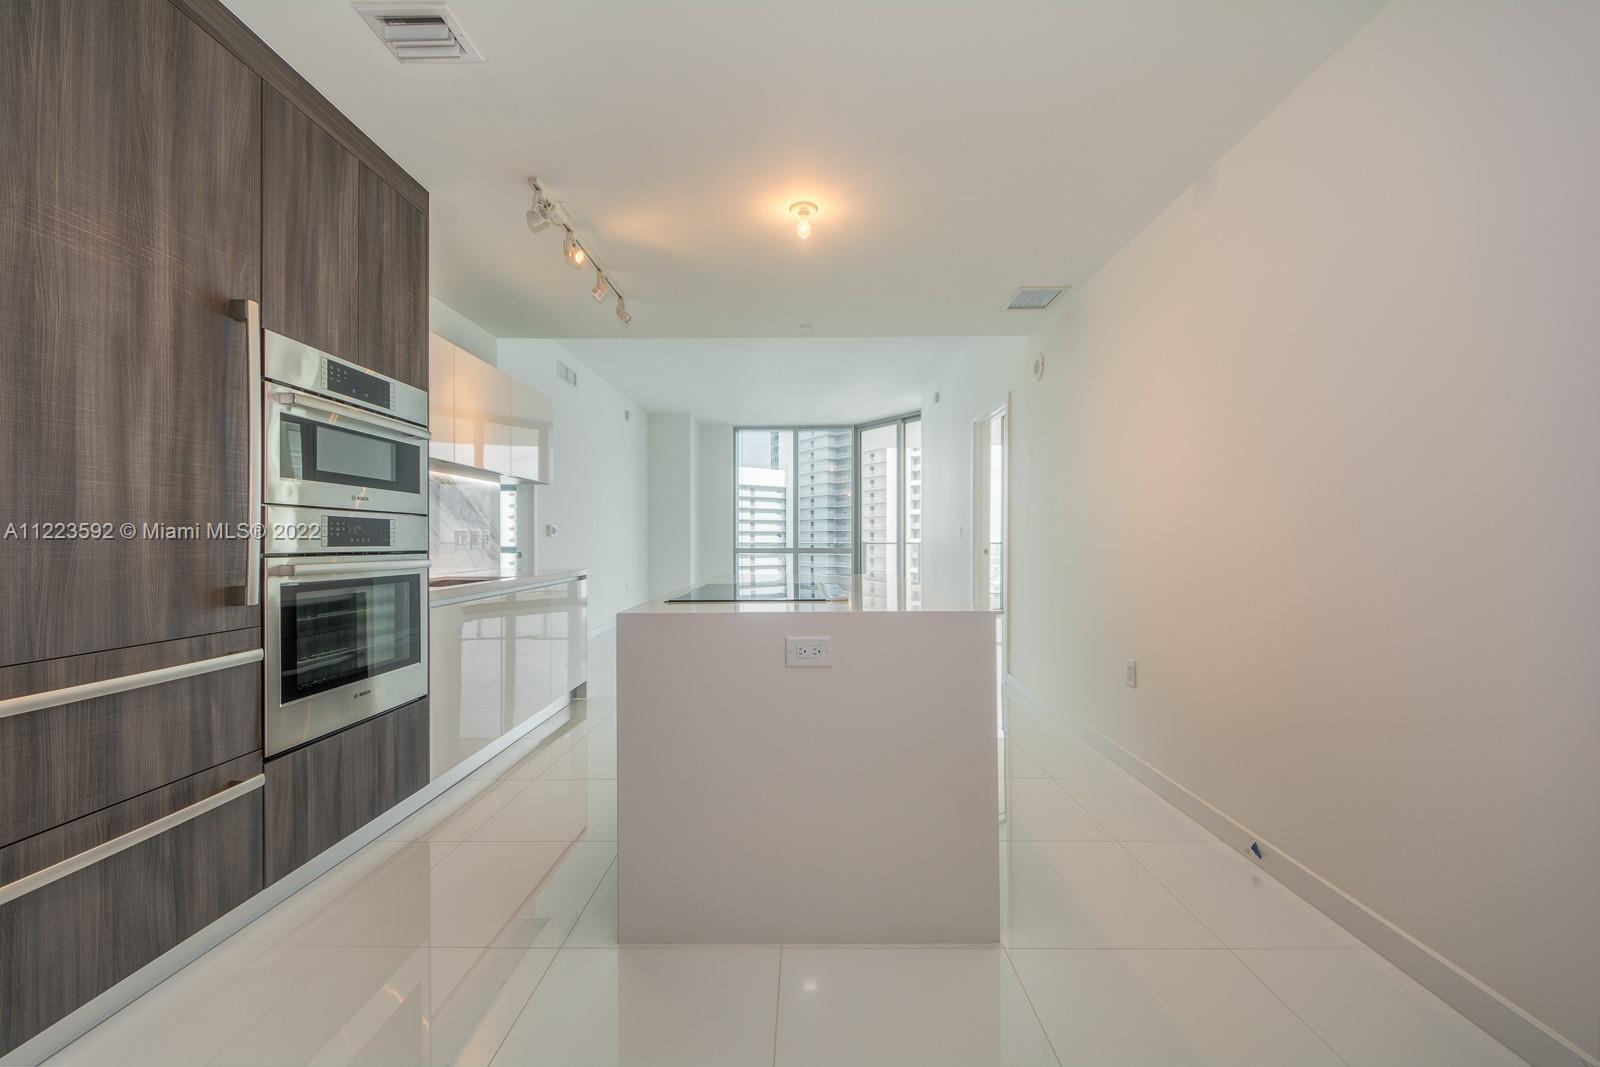 Stunning new construction unit @Paramount Miami World Center, 42th floor unit facing South-East with